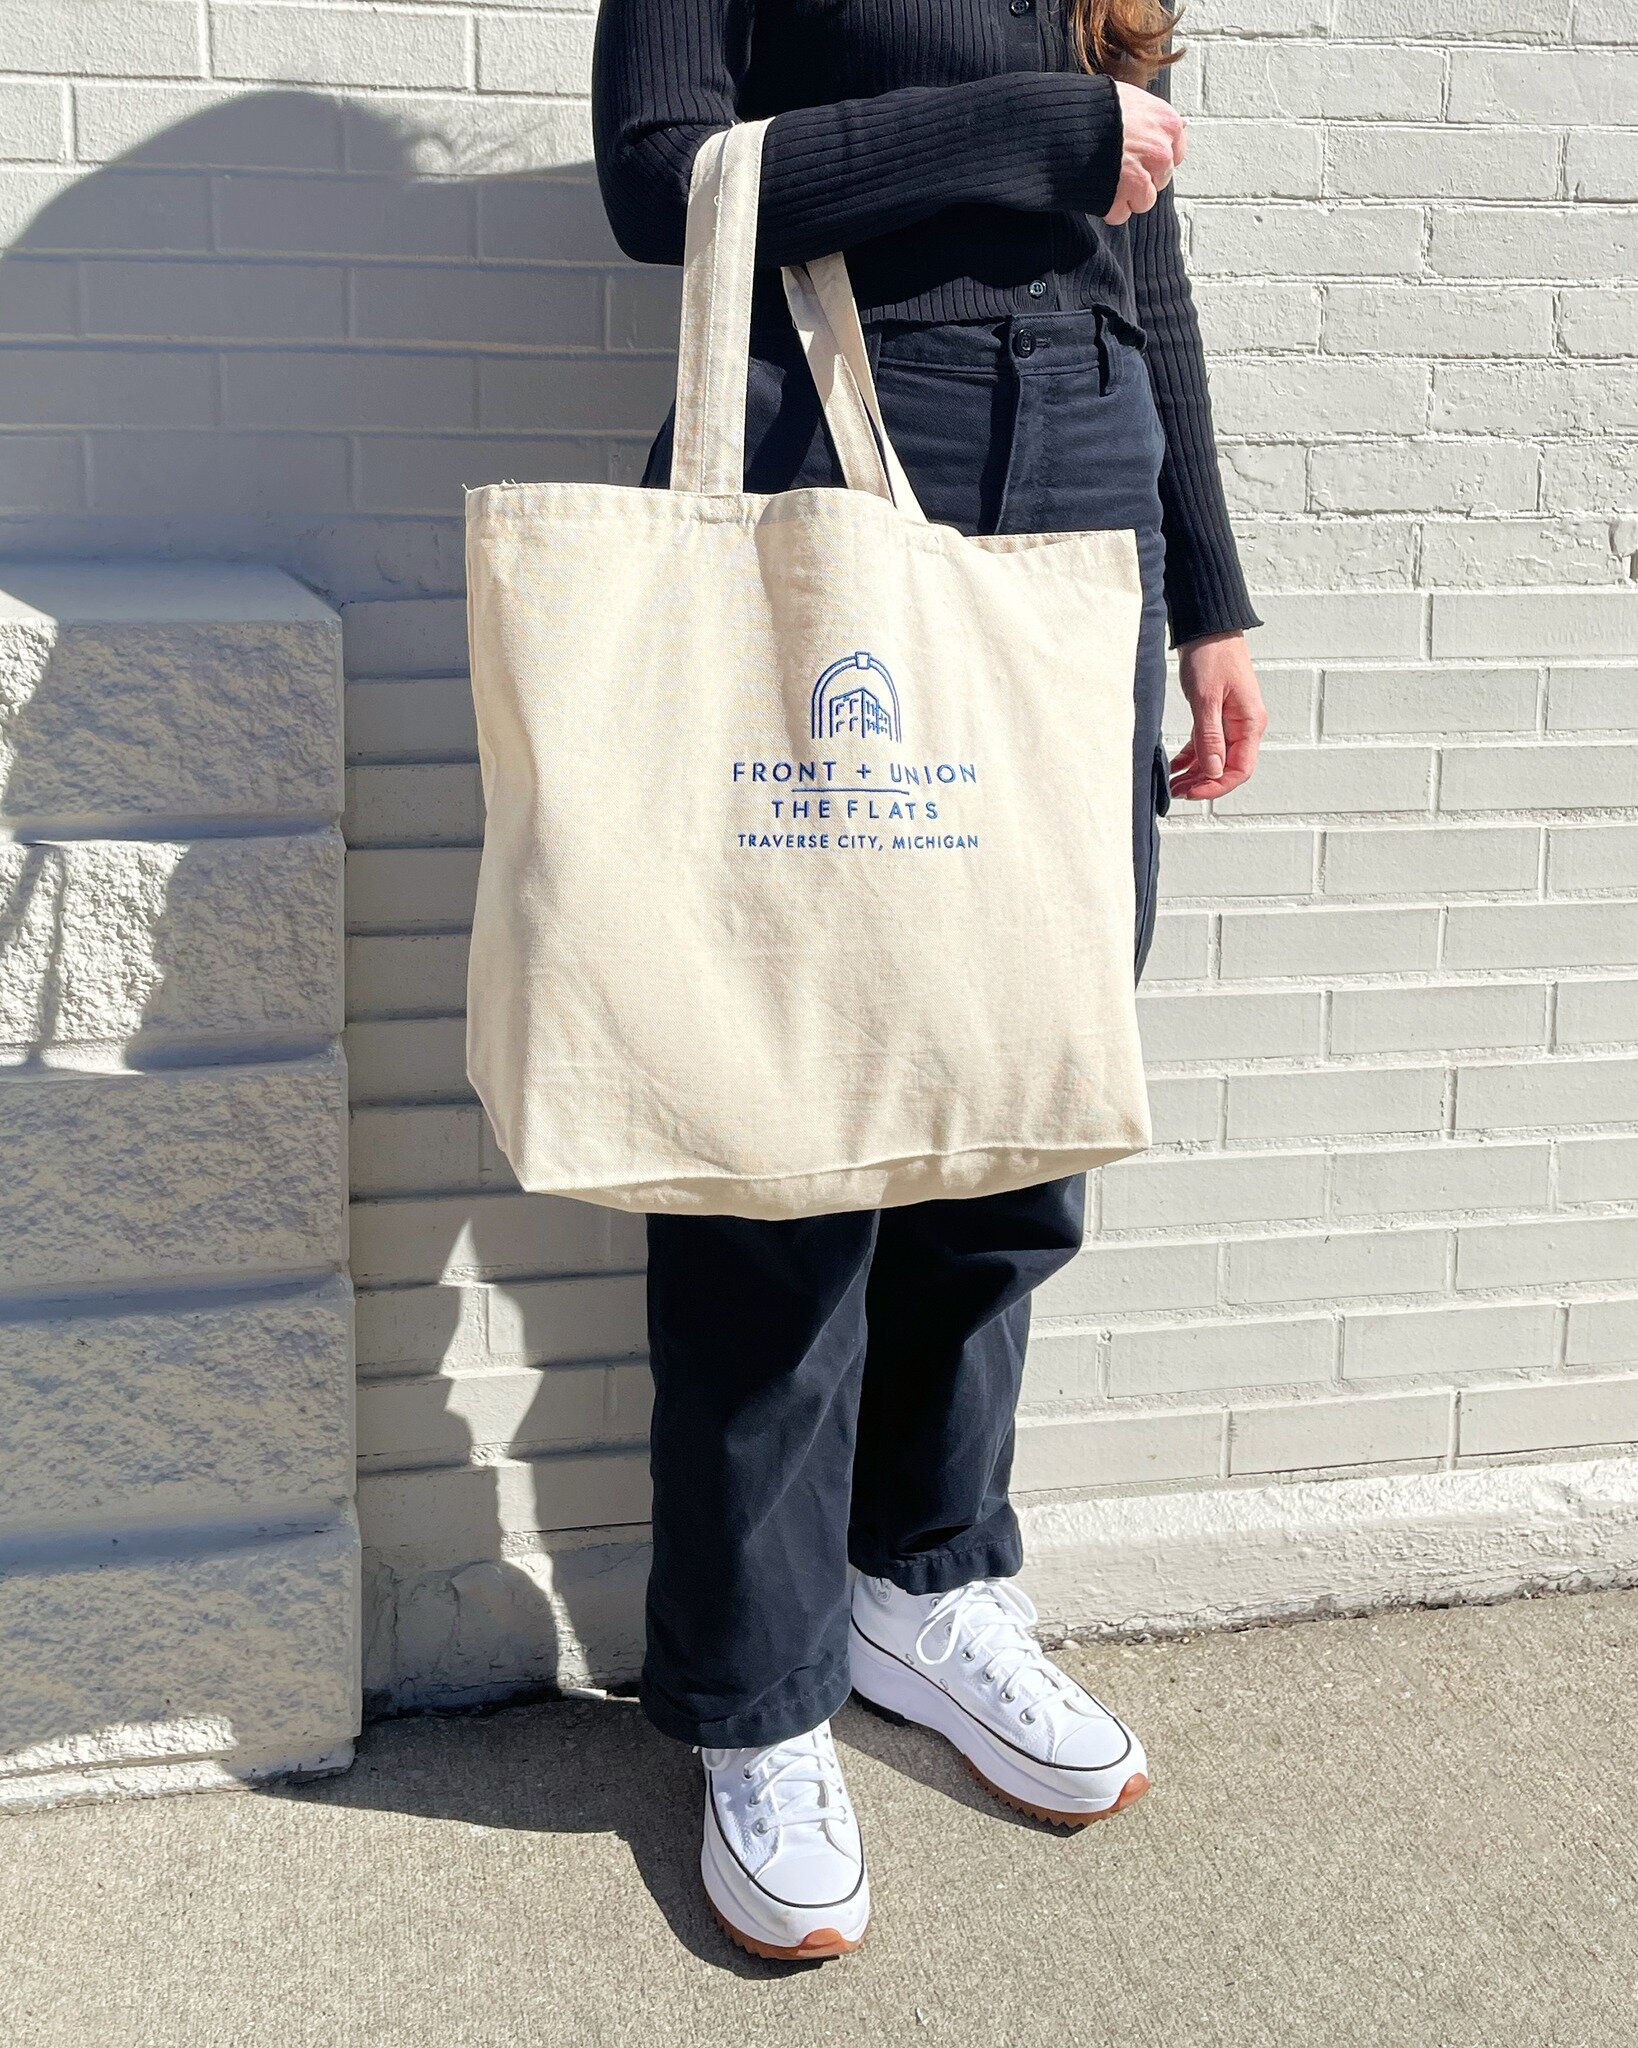 Carry a piece of Front &amp; Union with you! Enjoy our complimentary tote bag during your stay and take it home as a keepsake of your Traverse City experience.
.
.
.
#TheFlats #TraverseCity #DowntownTraverseCity #Totebag #Sustainability